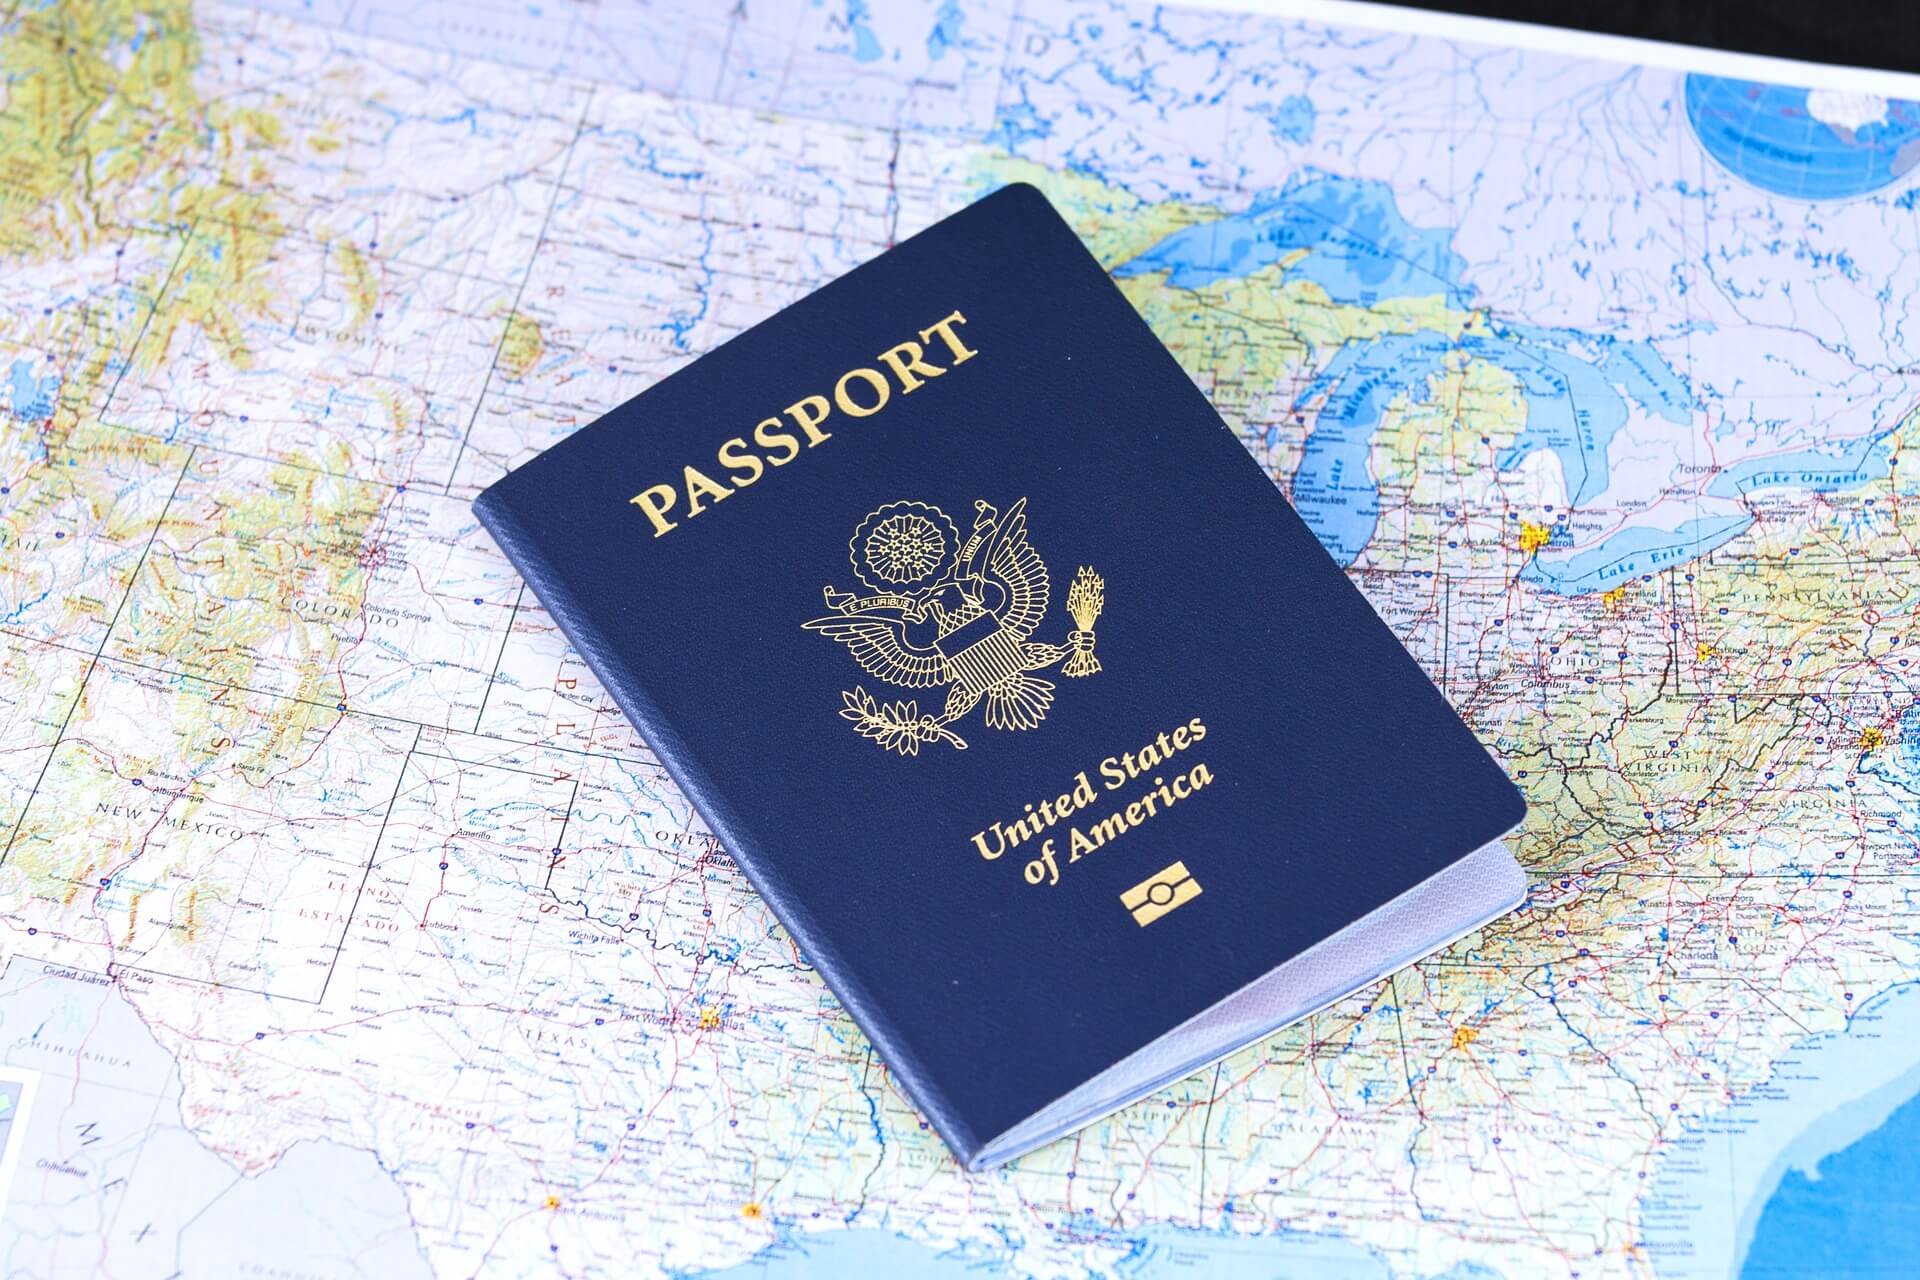 U.S. State Dept: Expect delays for passport renewals